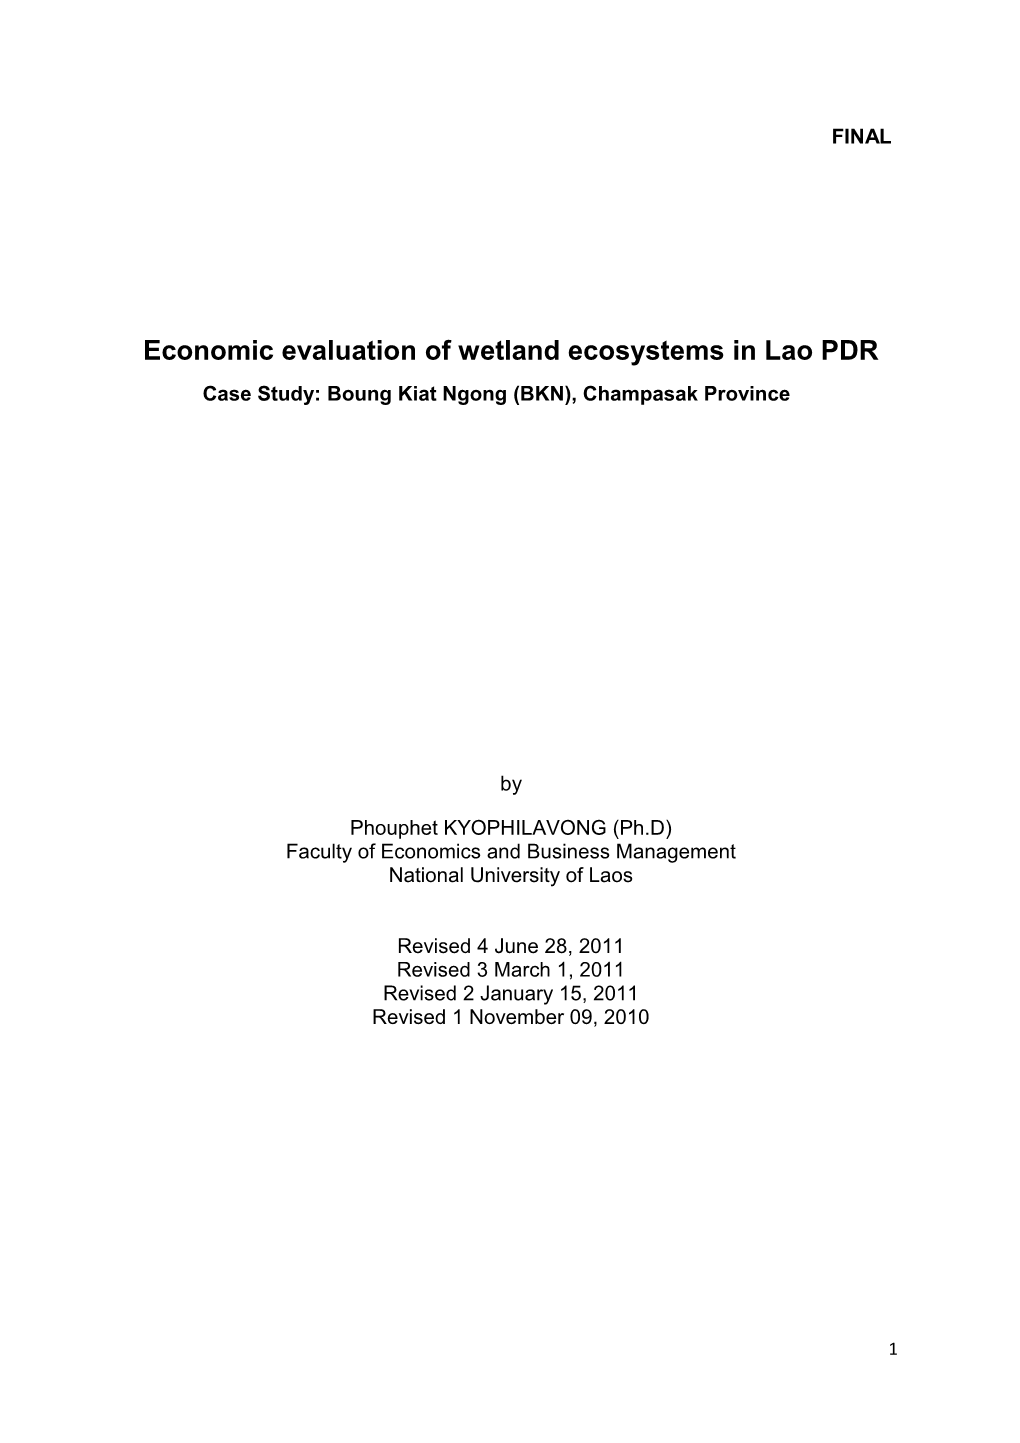 Economic Evaluation of Wetland Ecosystems in Lao PDR